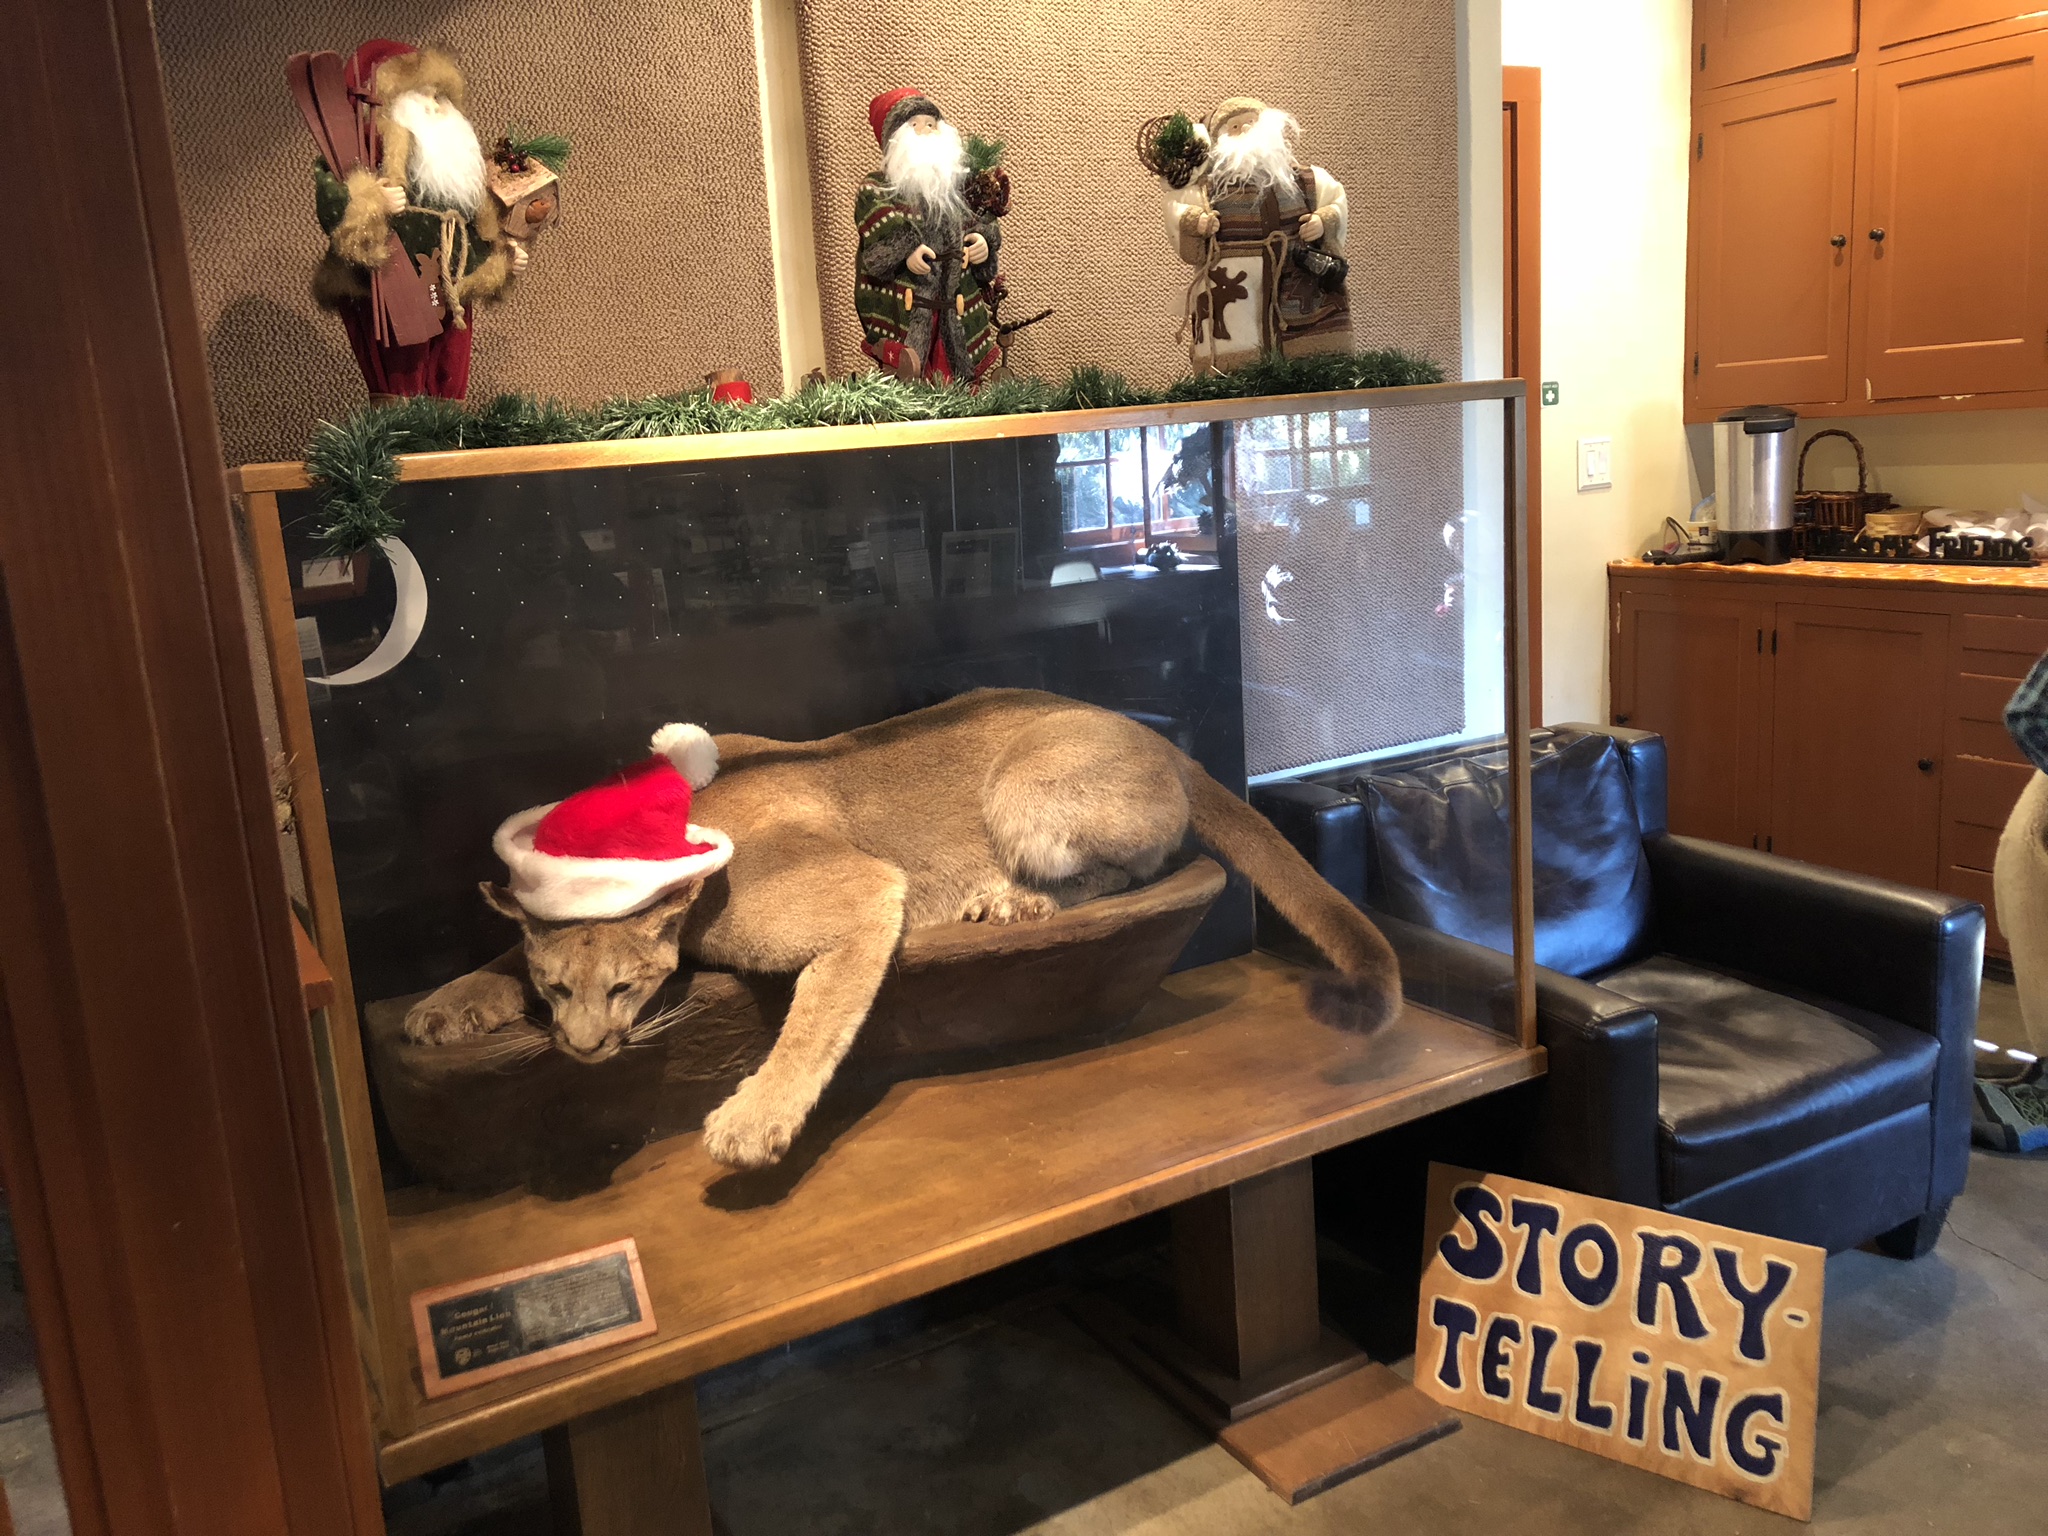 Holiday Event - Story Telling at Silver Falls State Park